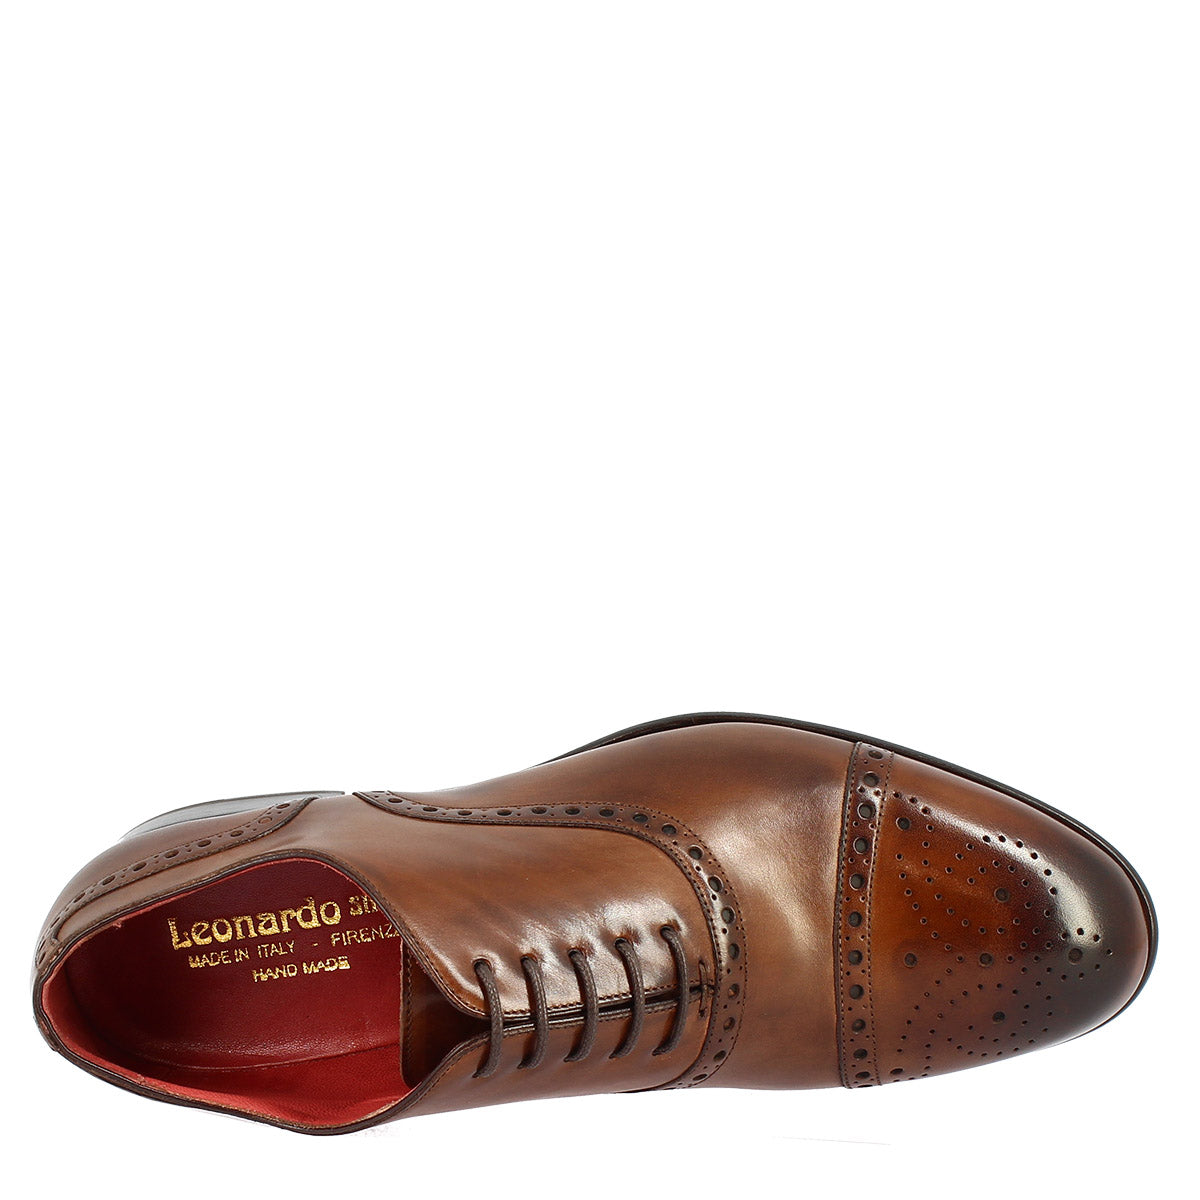 Men's lace-up brogues shoes handmade in montecarlo brandy leather